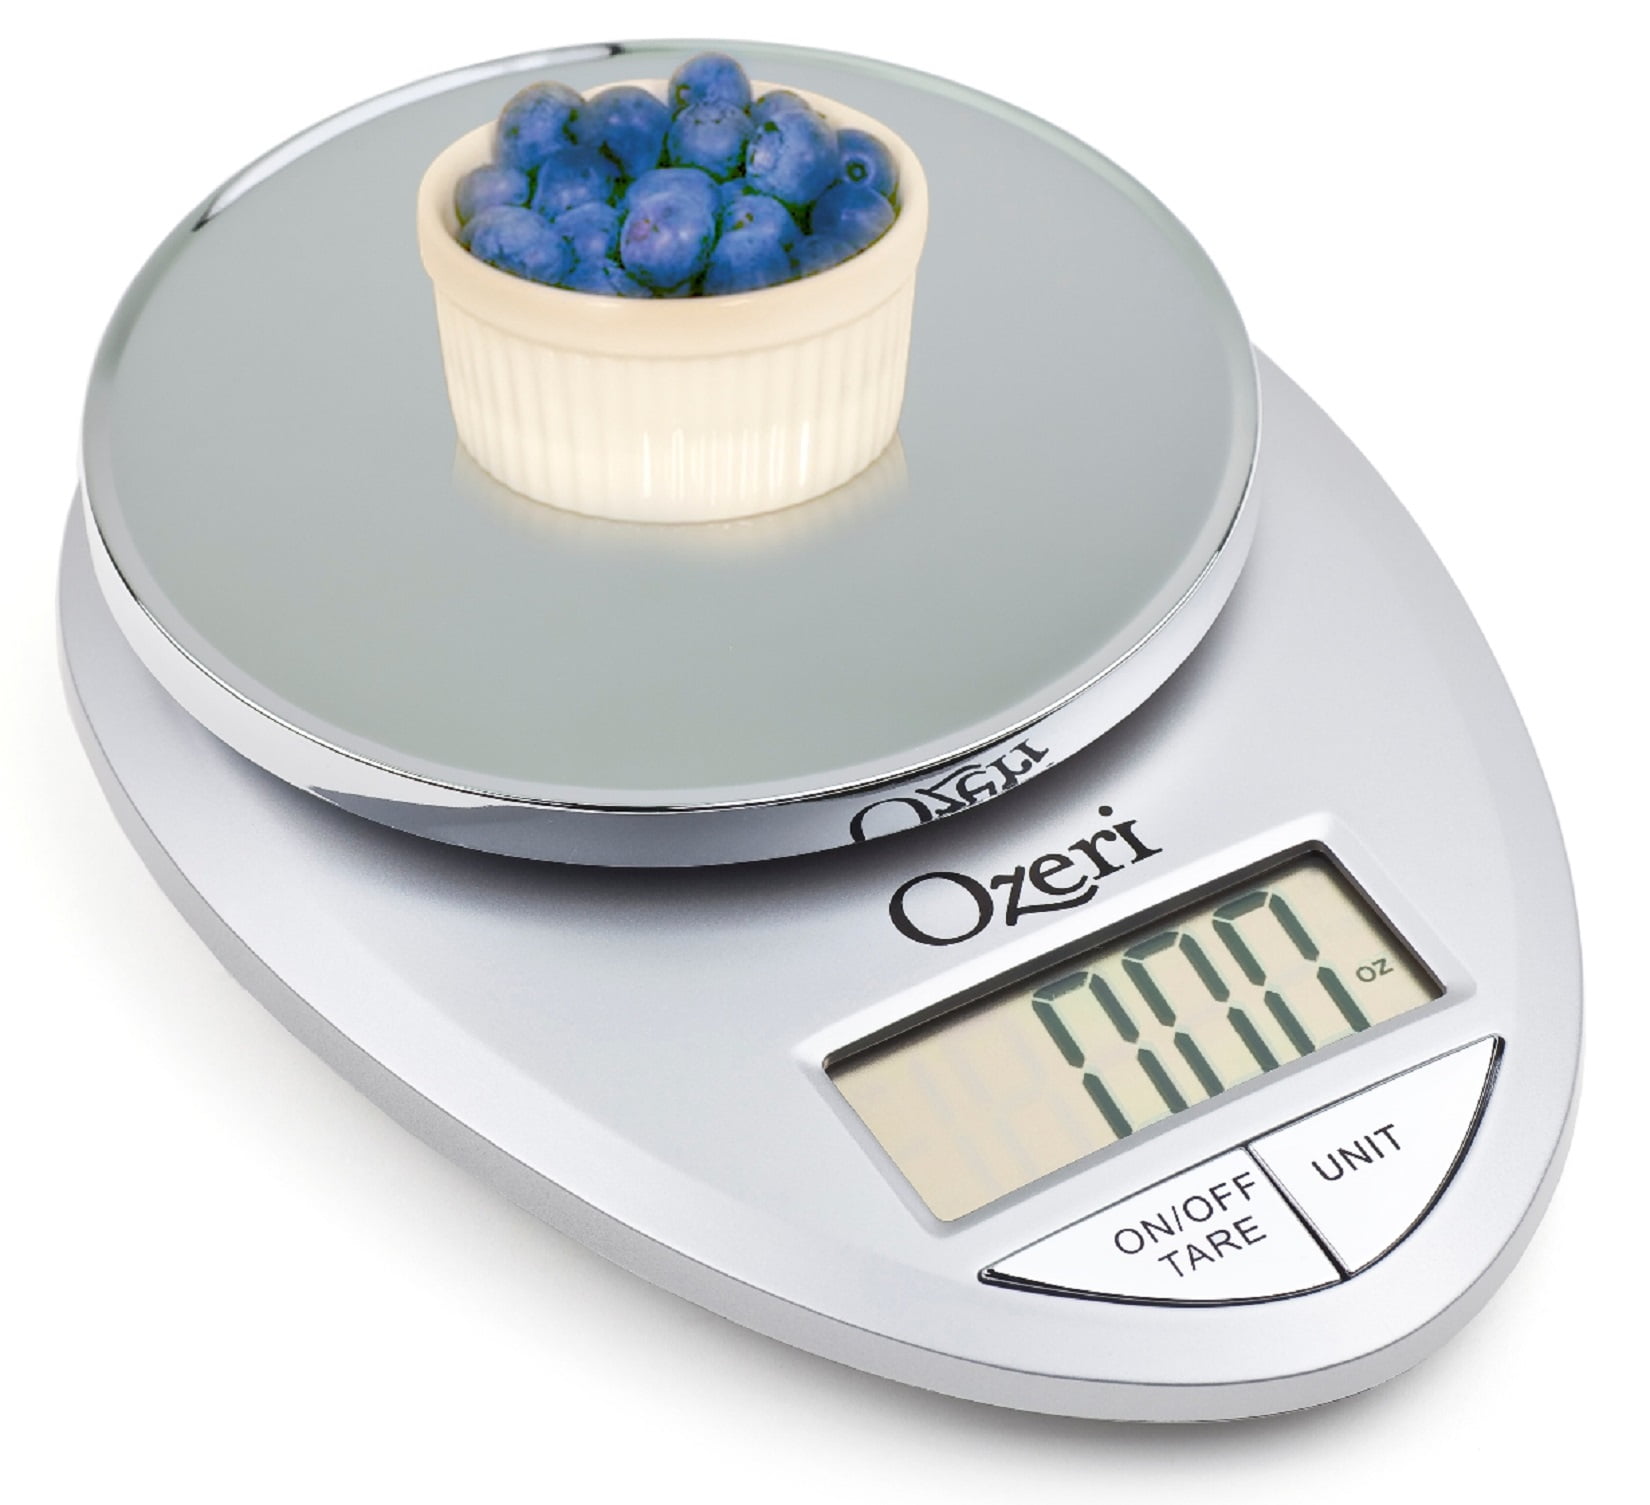 Ozeri Garden and Kitchen Scale II, Digital Food Scale with 0.1 g (0.005  oz.) Teal, 420 Variable Graduation Technology ZK28-T - The Home Depot